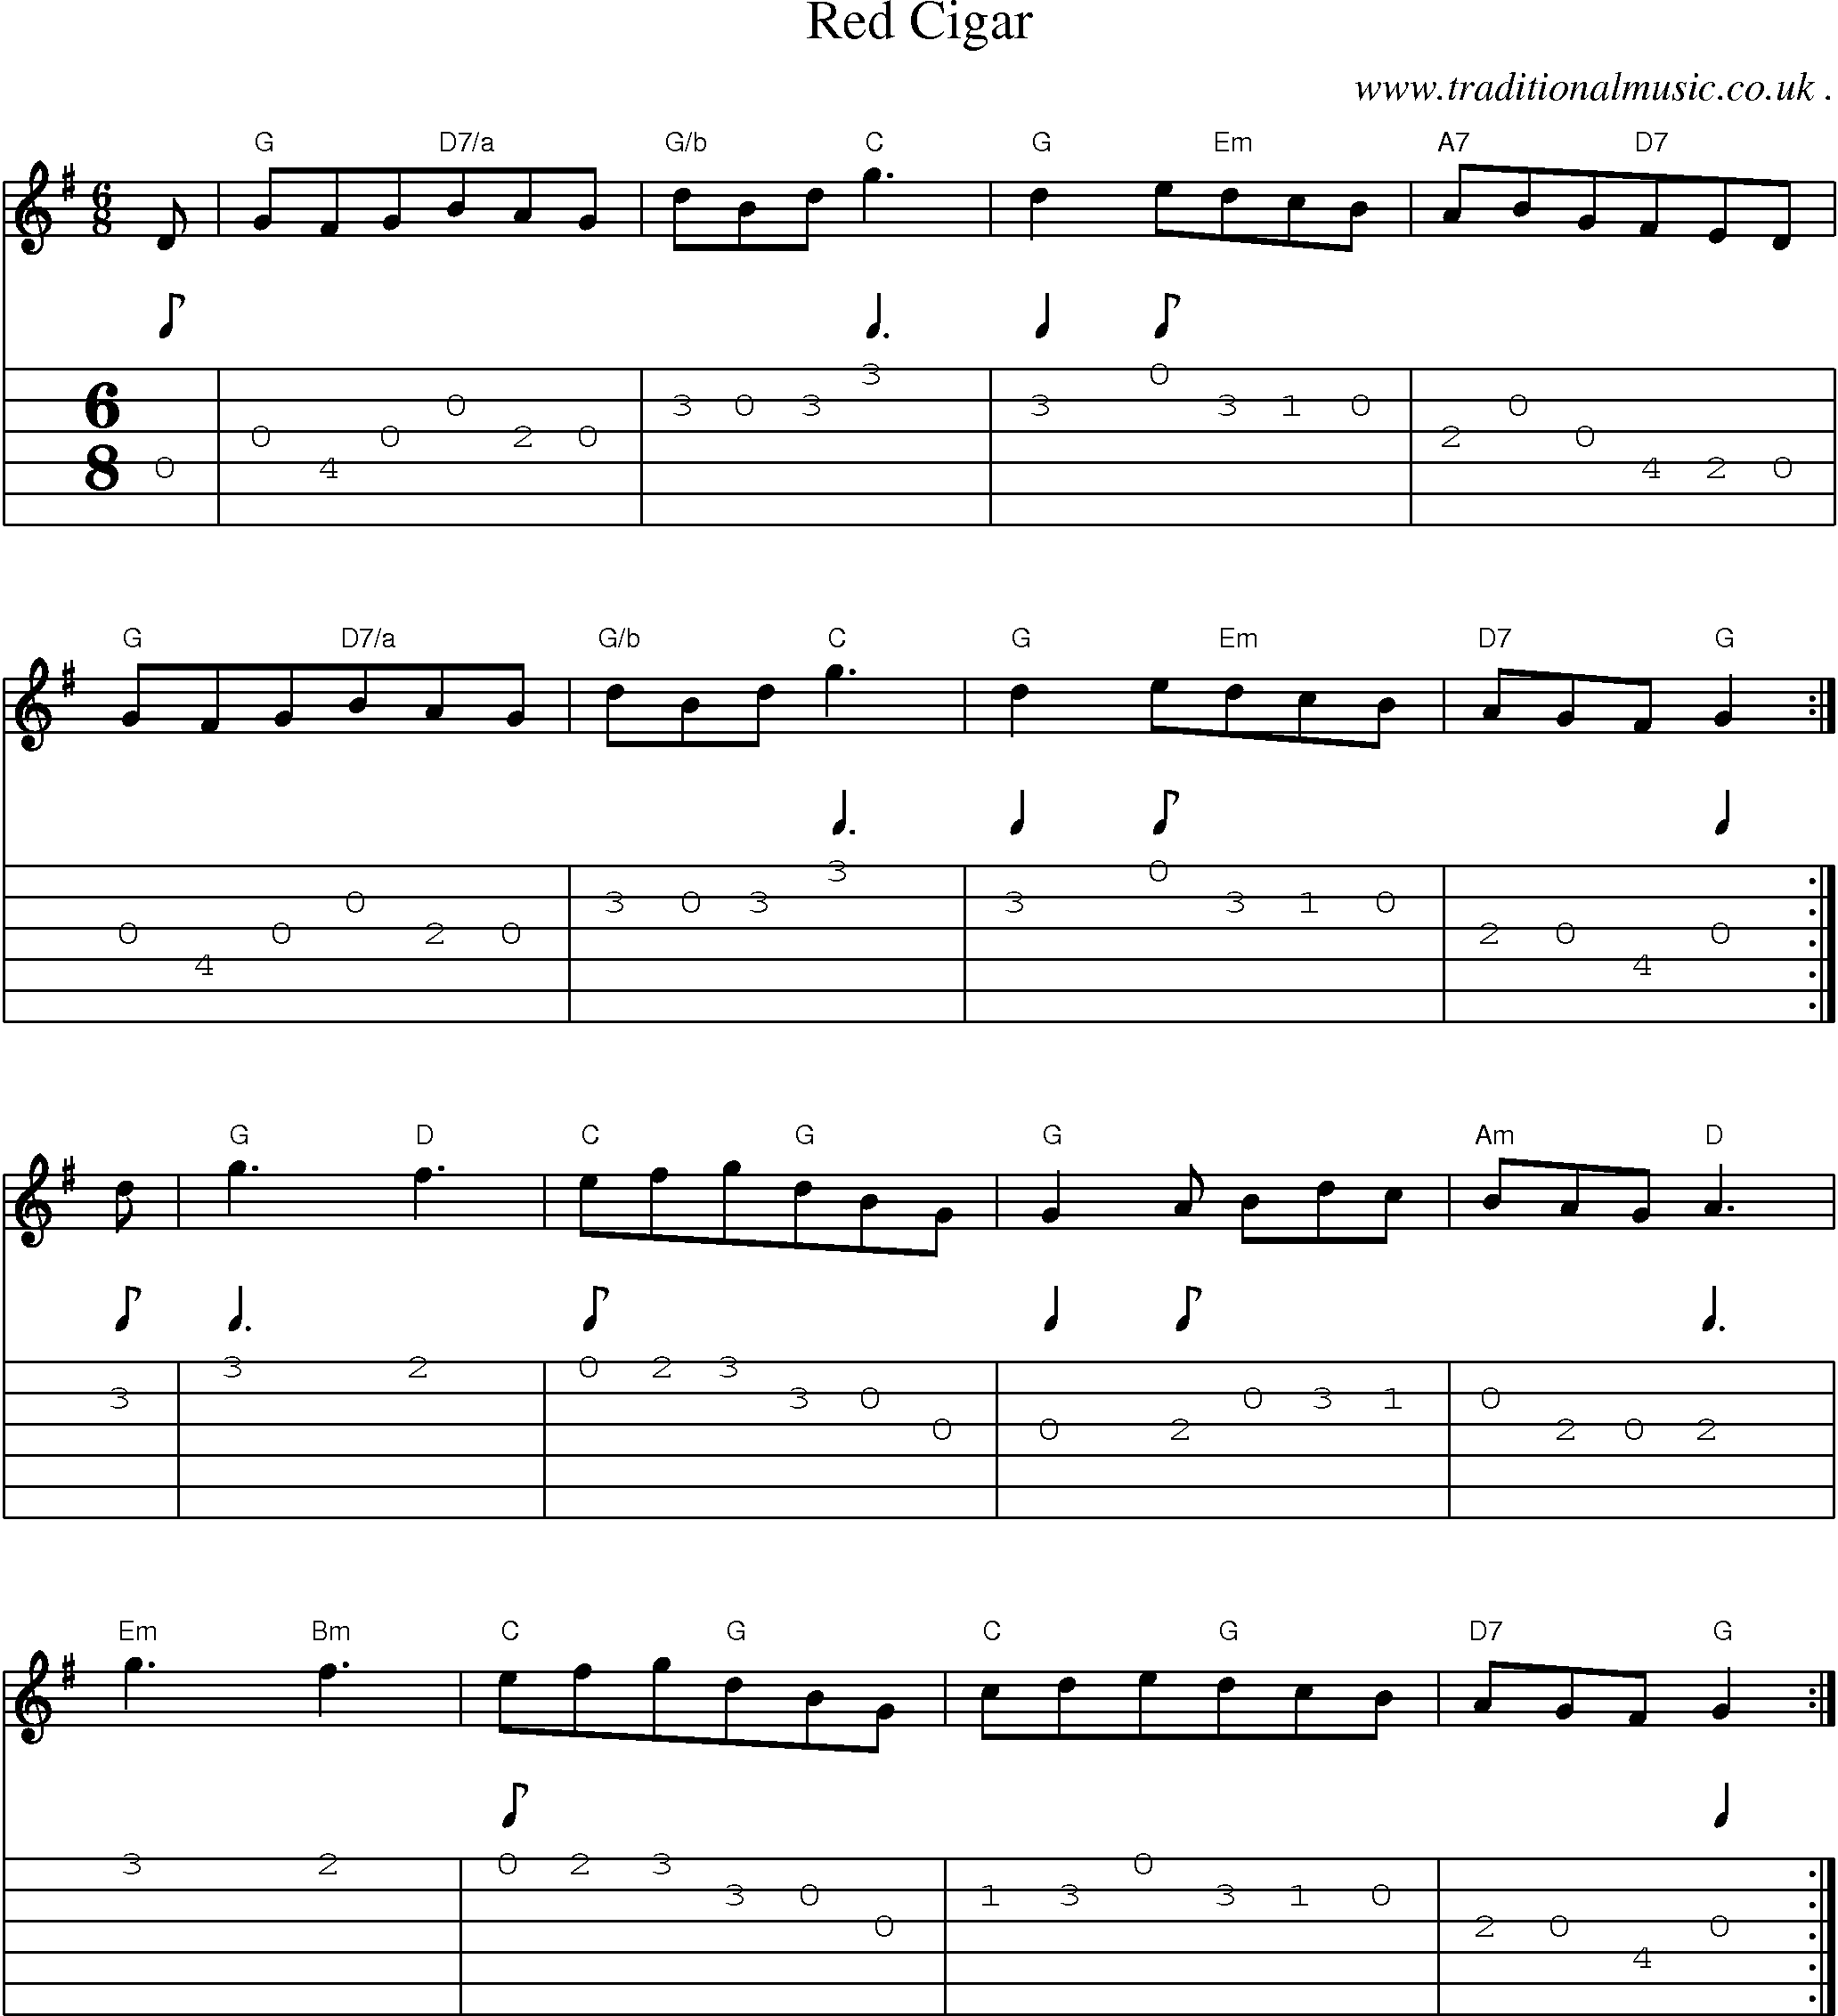 Sheet-Music and Guitar Tabs for Red Cigar